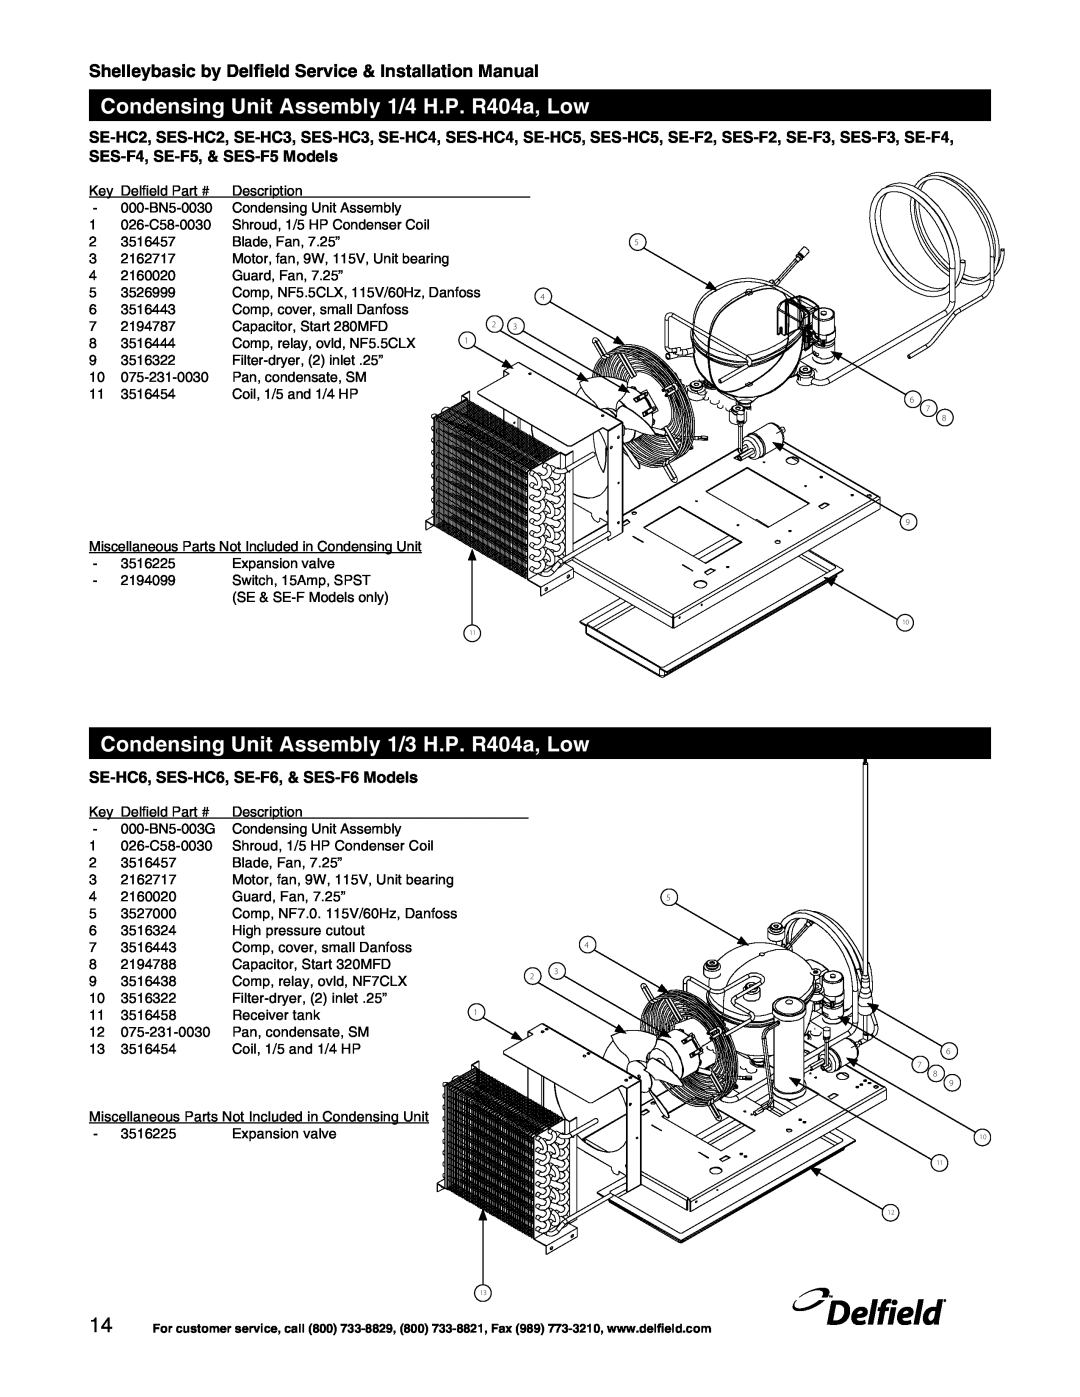 Delfield Shelleybasic Condensing Unit Assembly 1/4 H.P. R404a, Low, Condensing Unit Assembly 1/3 H.P. R404a, Low, Delfield 